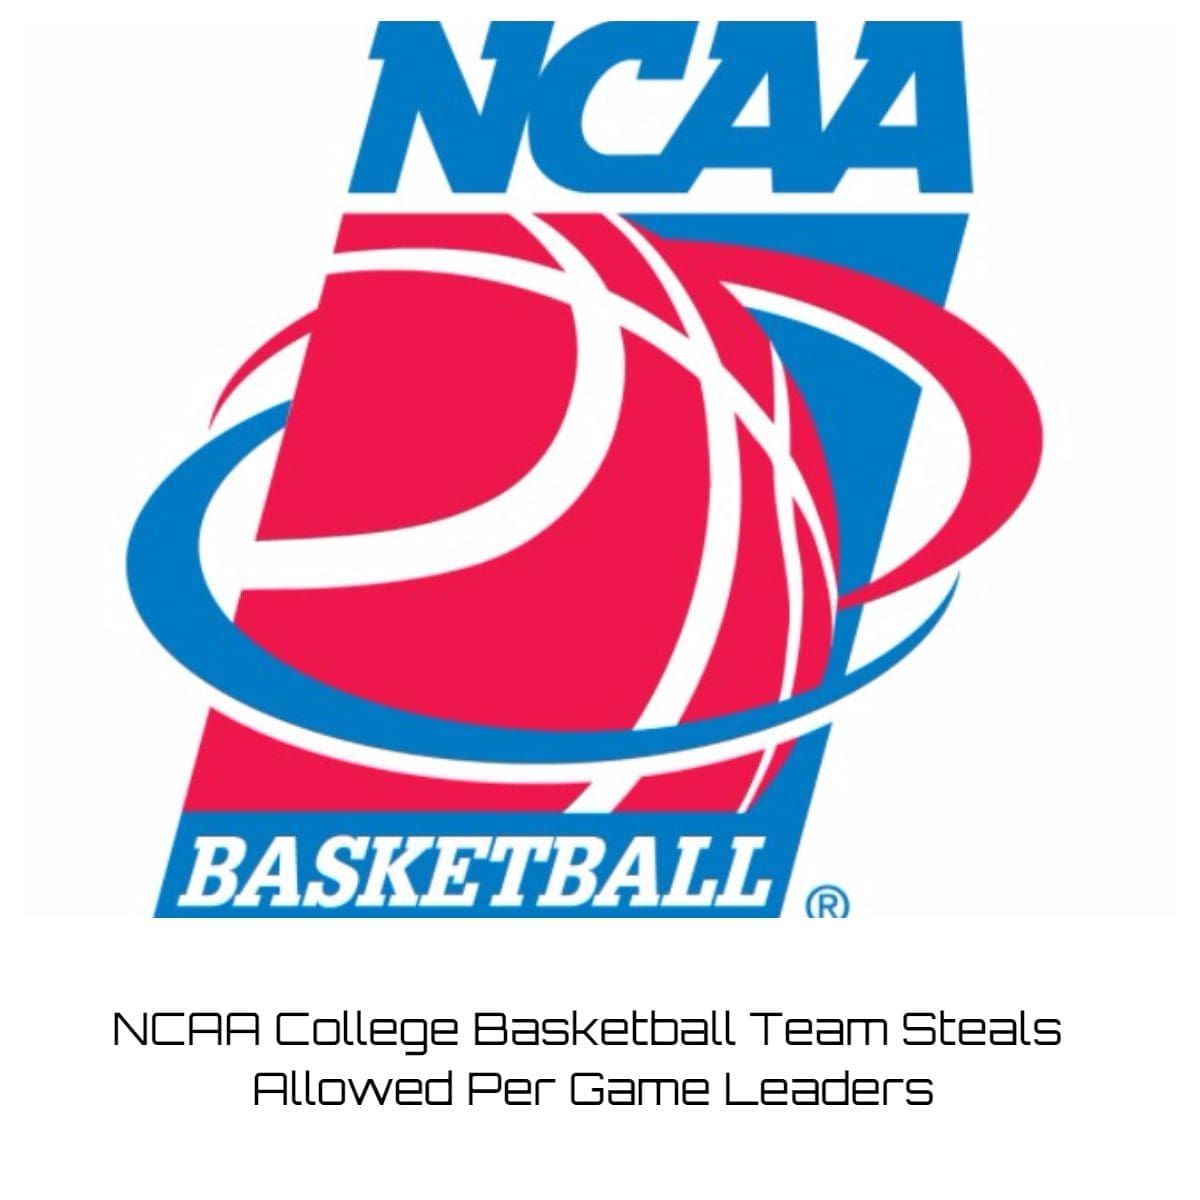 NCAA College Basketball Team Steals Allowed Per Game Leaders